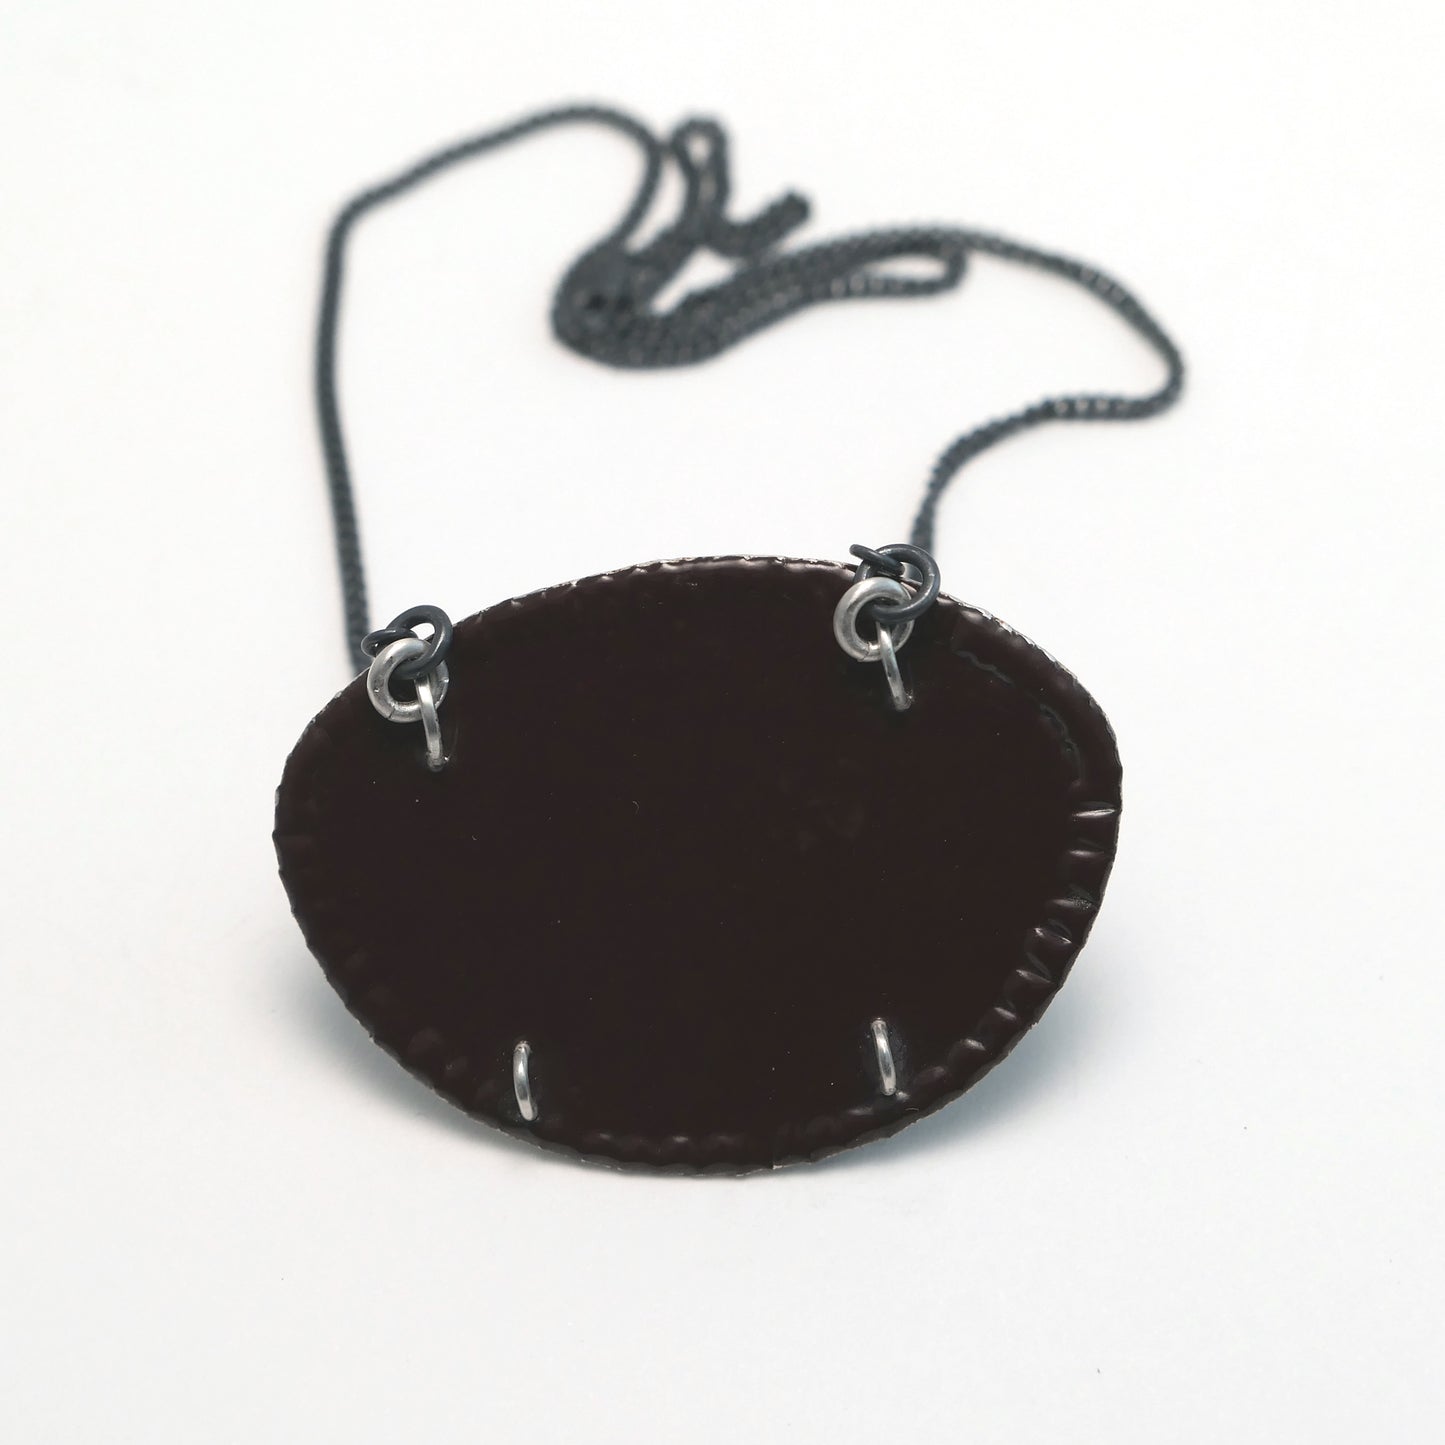 Necklace. Dark chocolate-brown vitreous enamel on silver, with oxidised silver chain